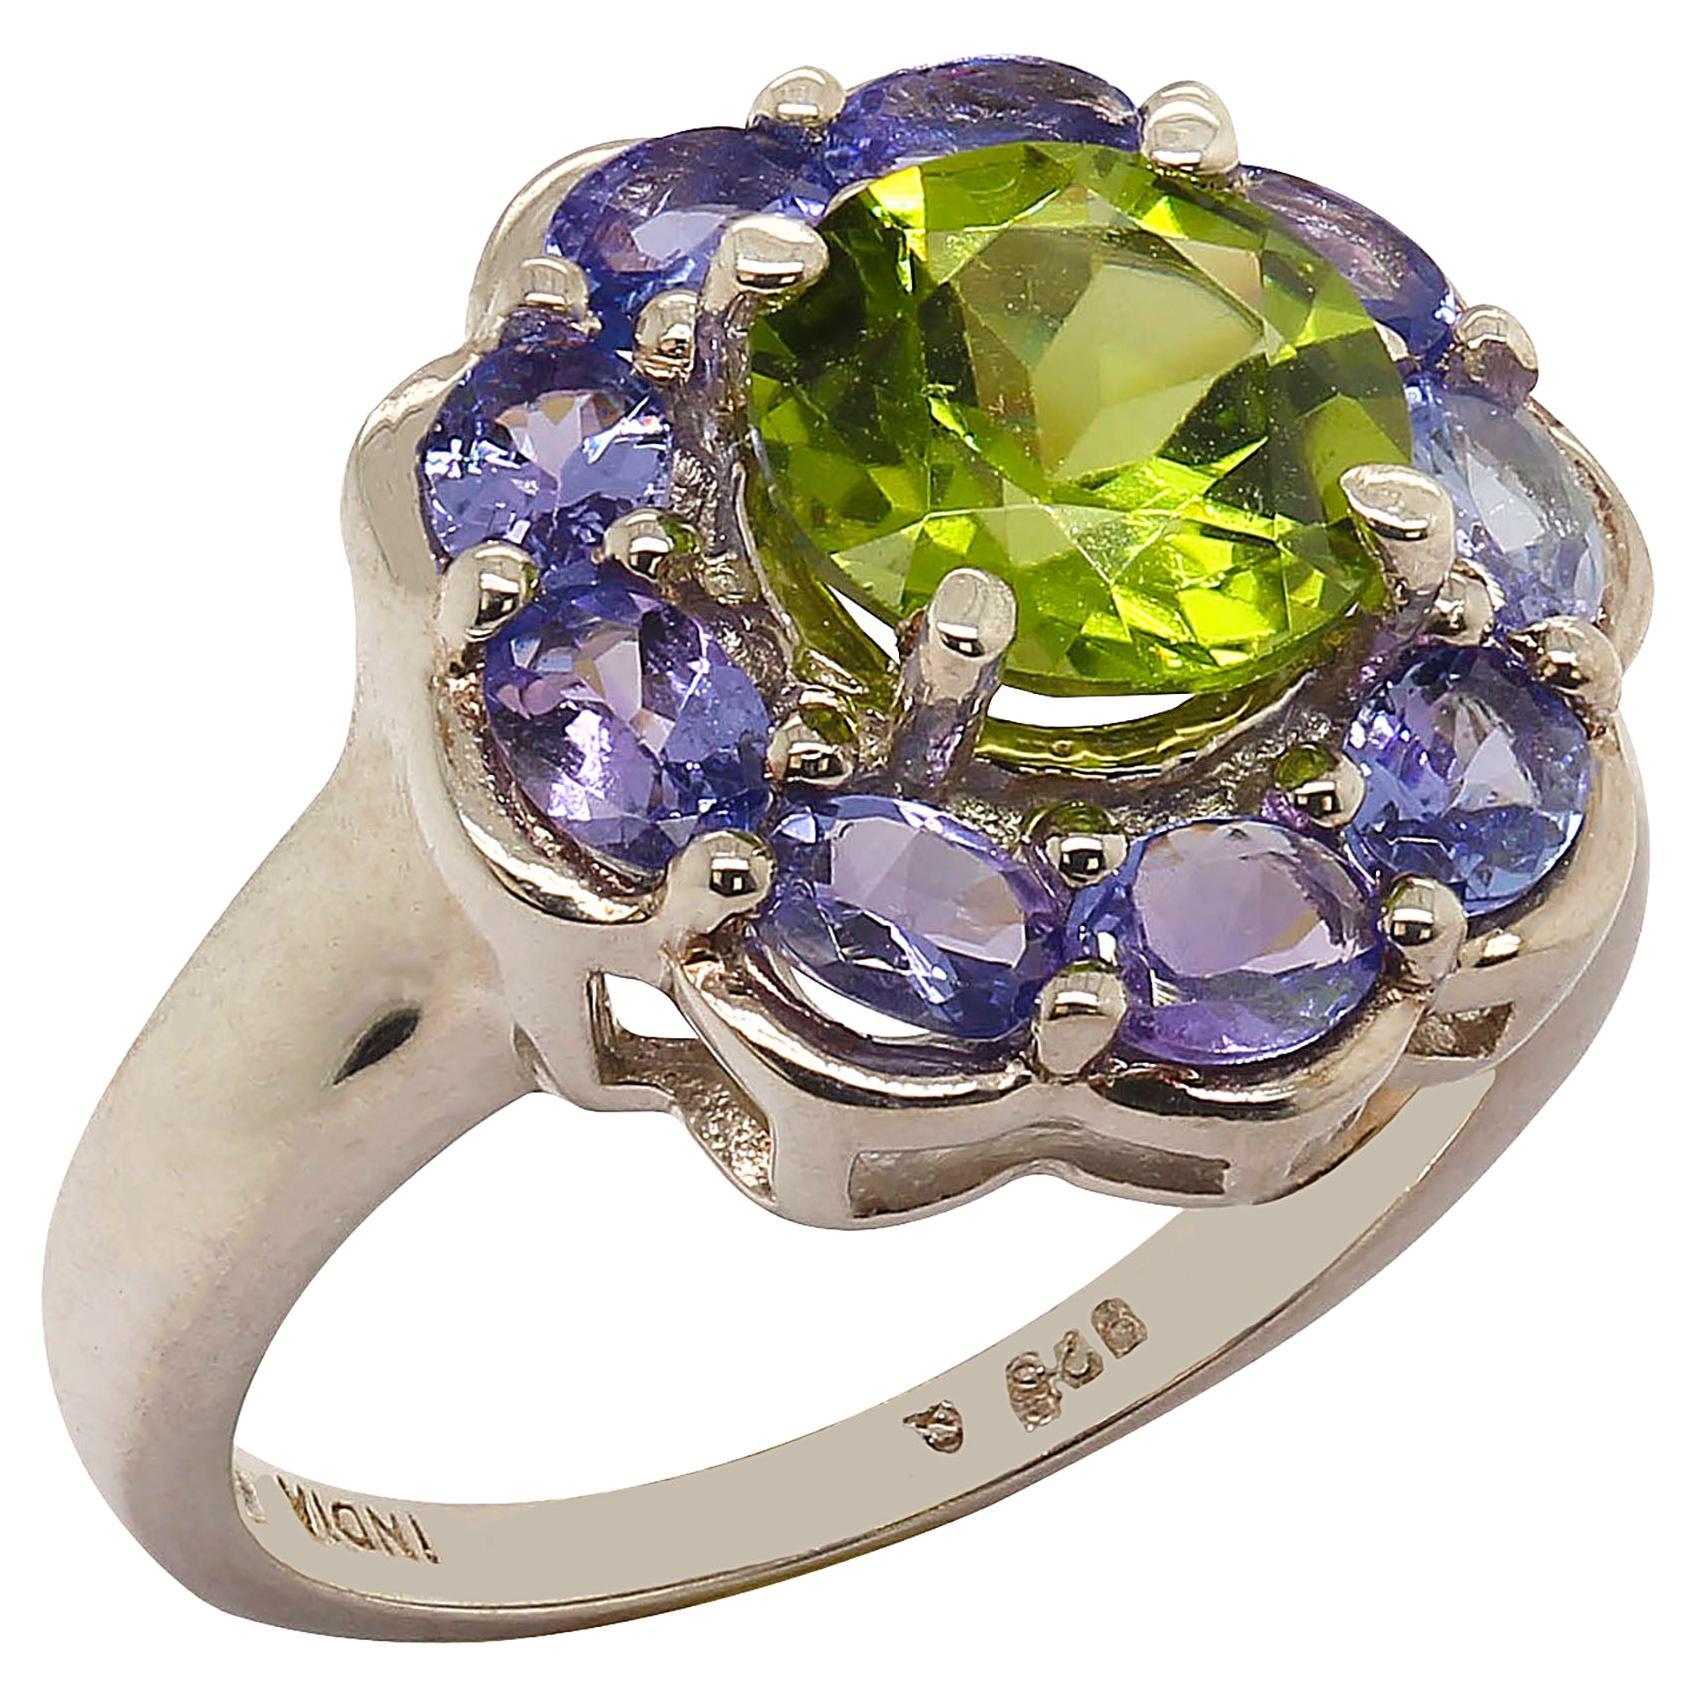 AJD Sparkling Ring of Green Peridot in Tanzanite Halo Sterling Silver